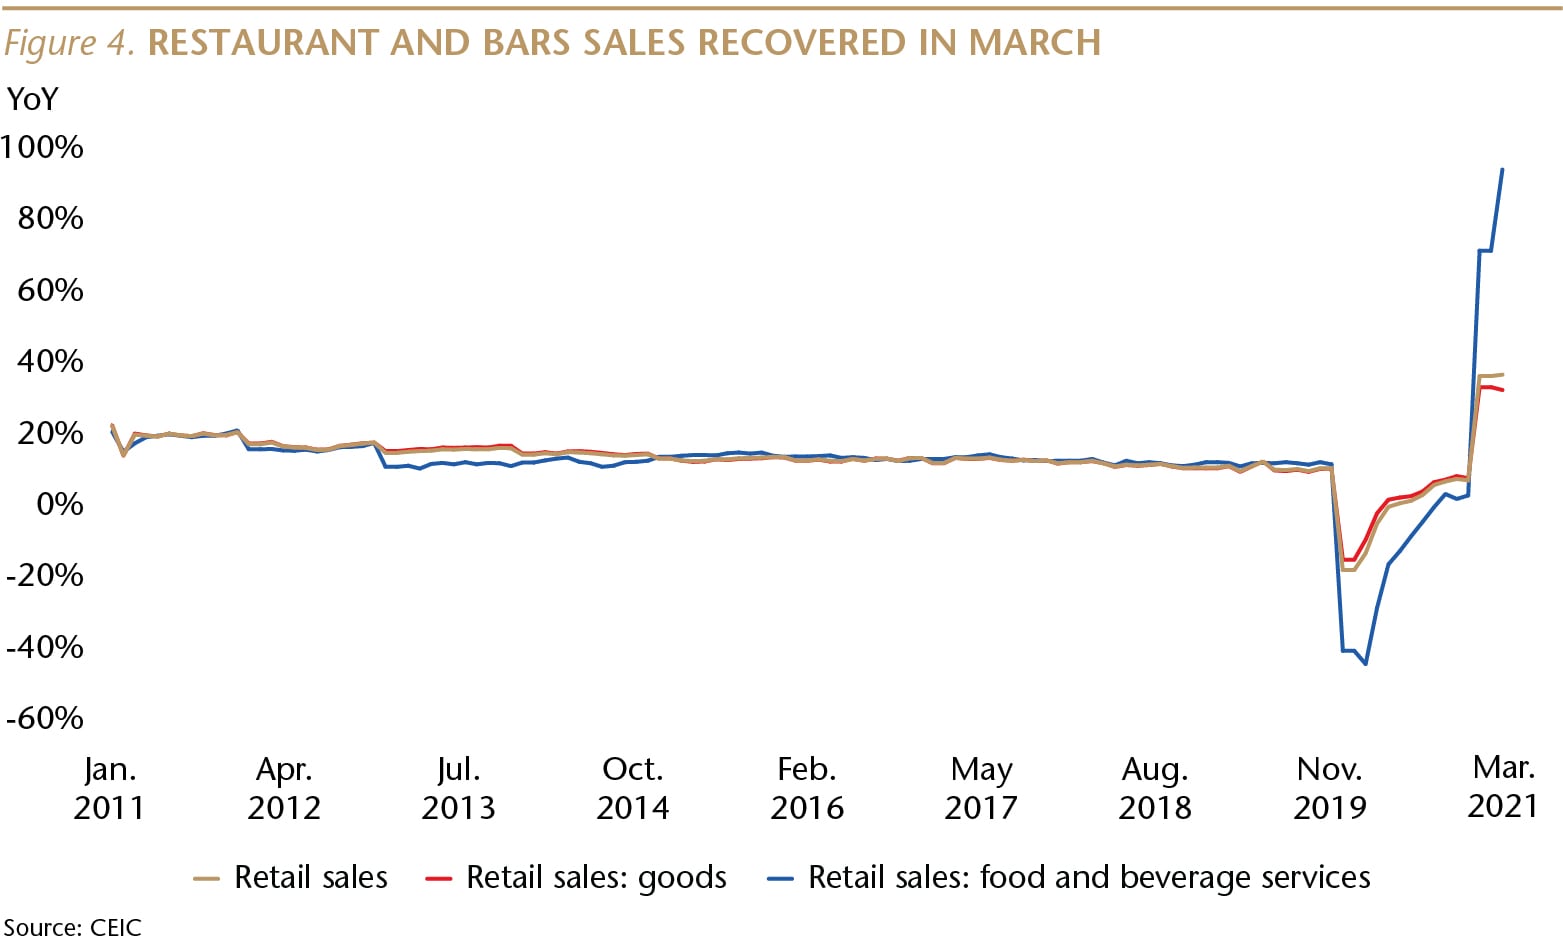 SI075_Figure 4_Restaurant and Bar Sales Recovered_WEB-01-min.jpg